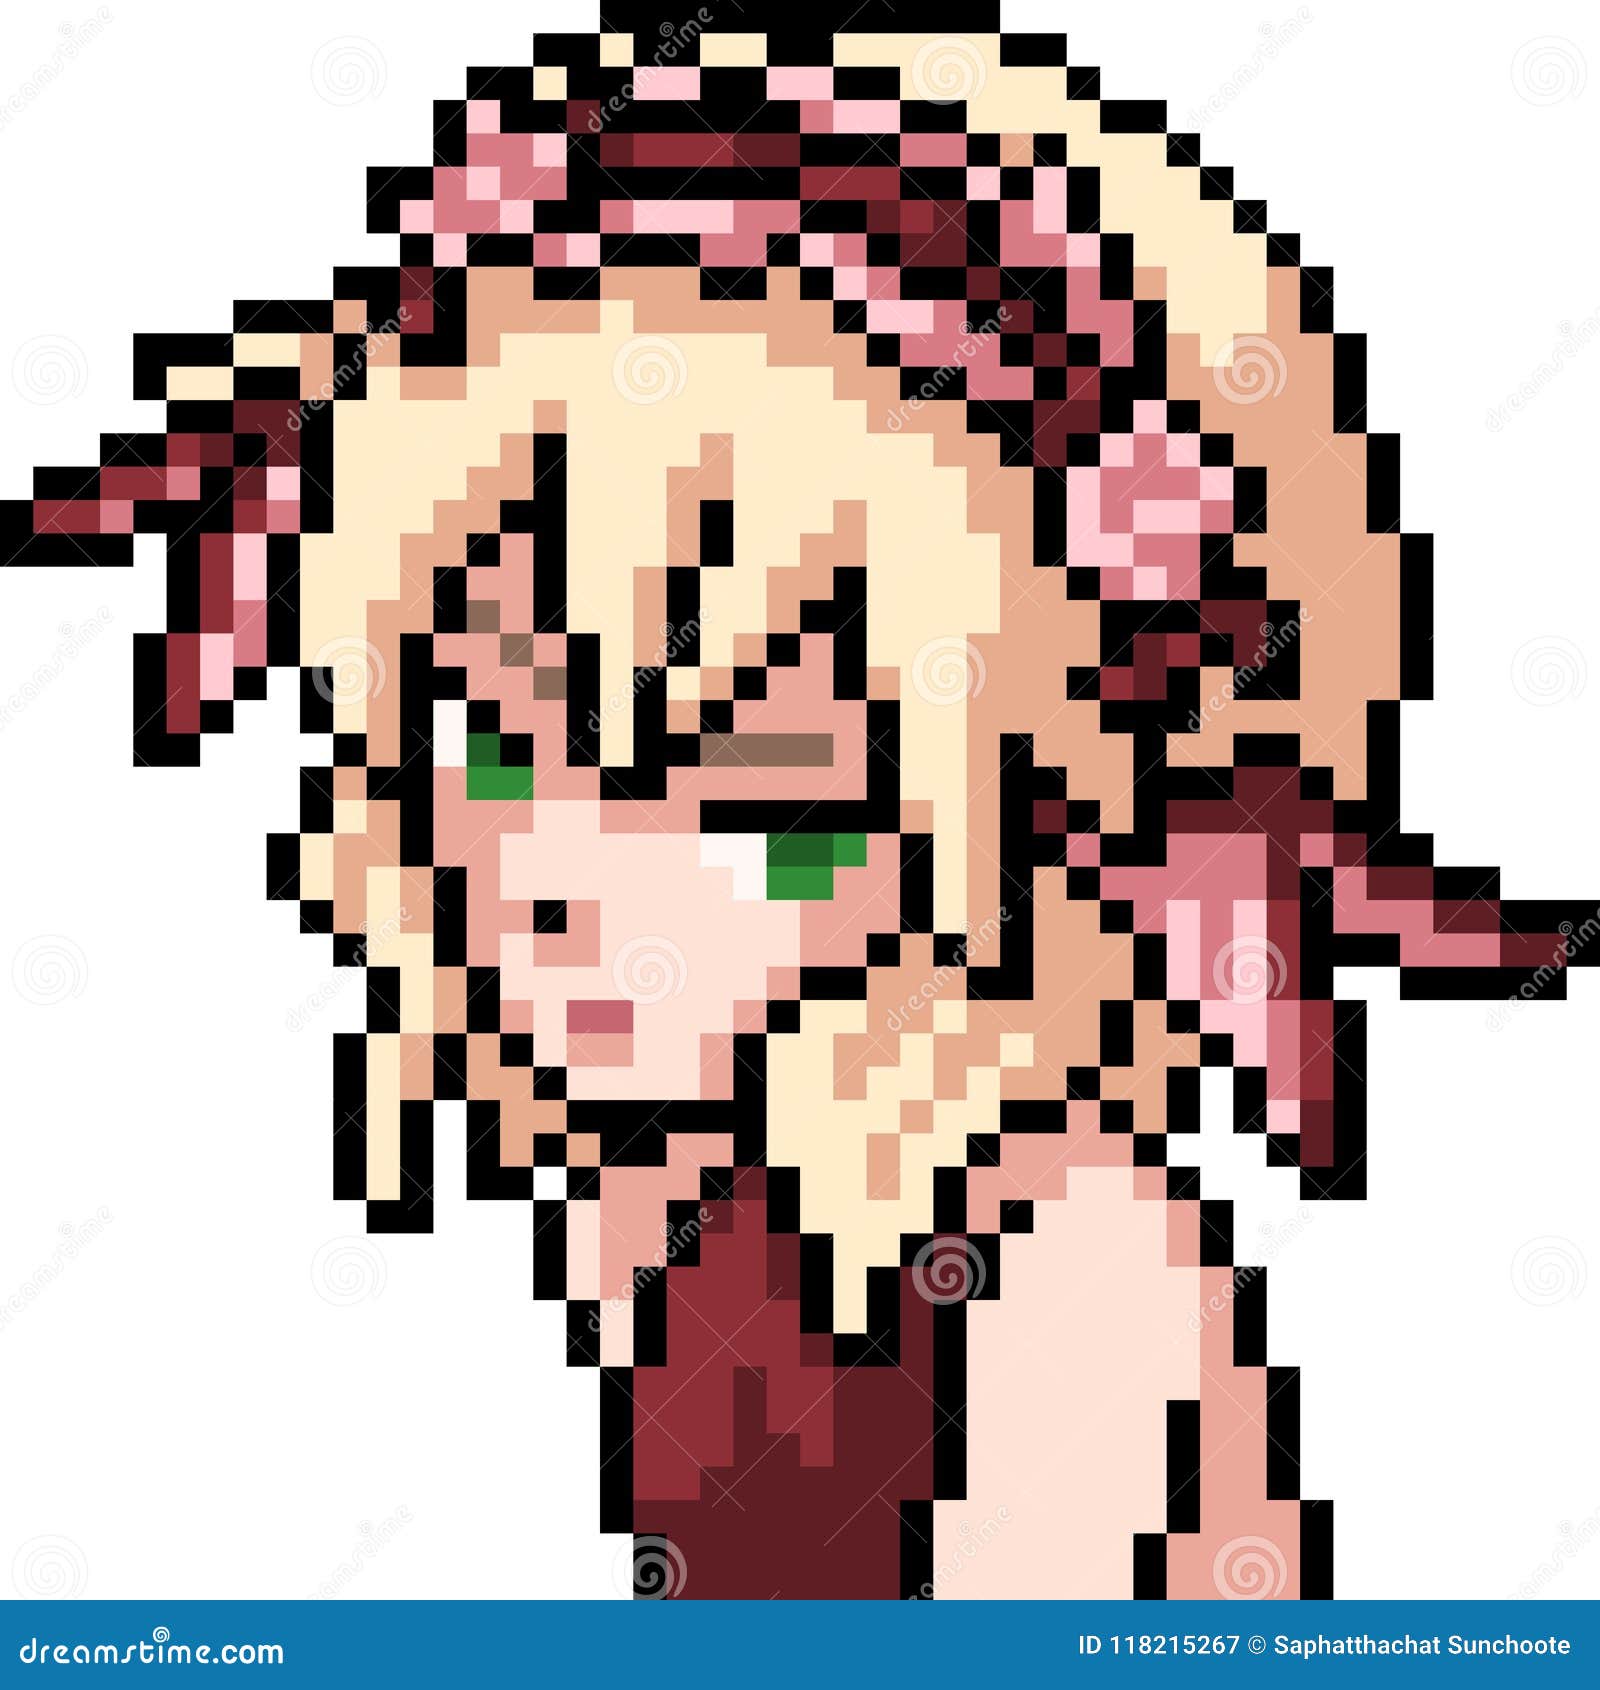 A pixel art of our Queen that I made on Minecraft a little while ago   rtoradora